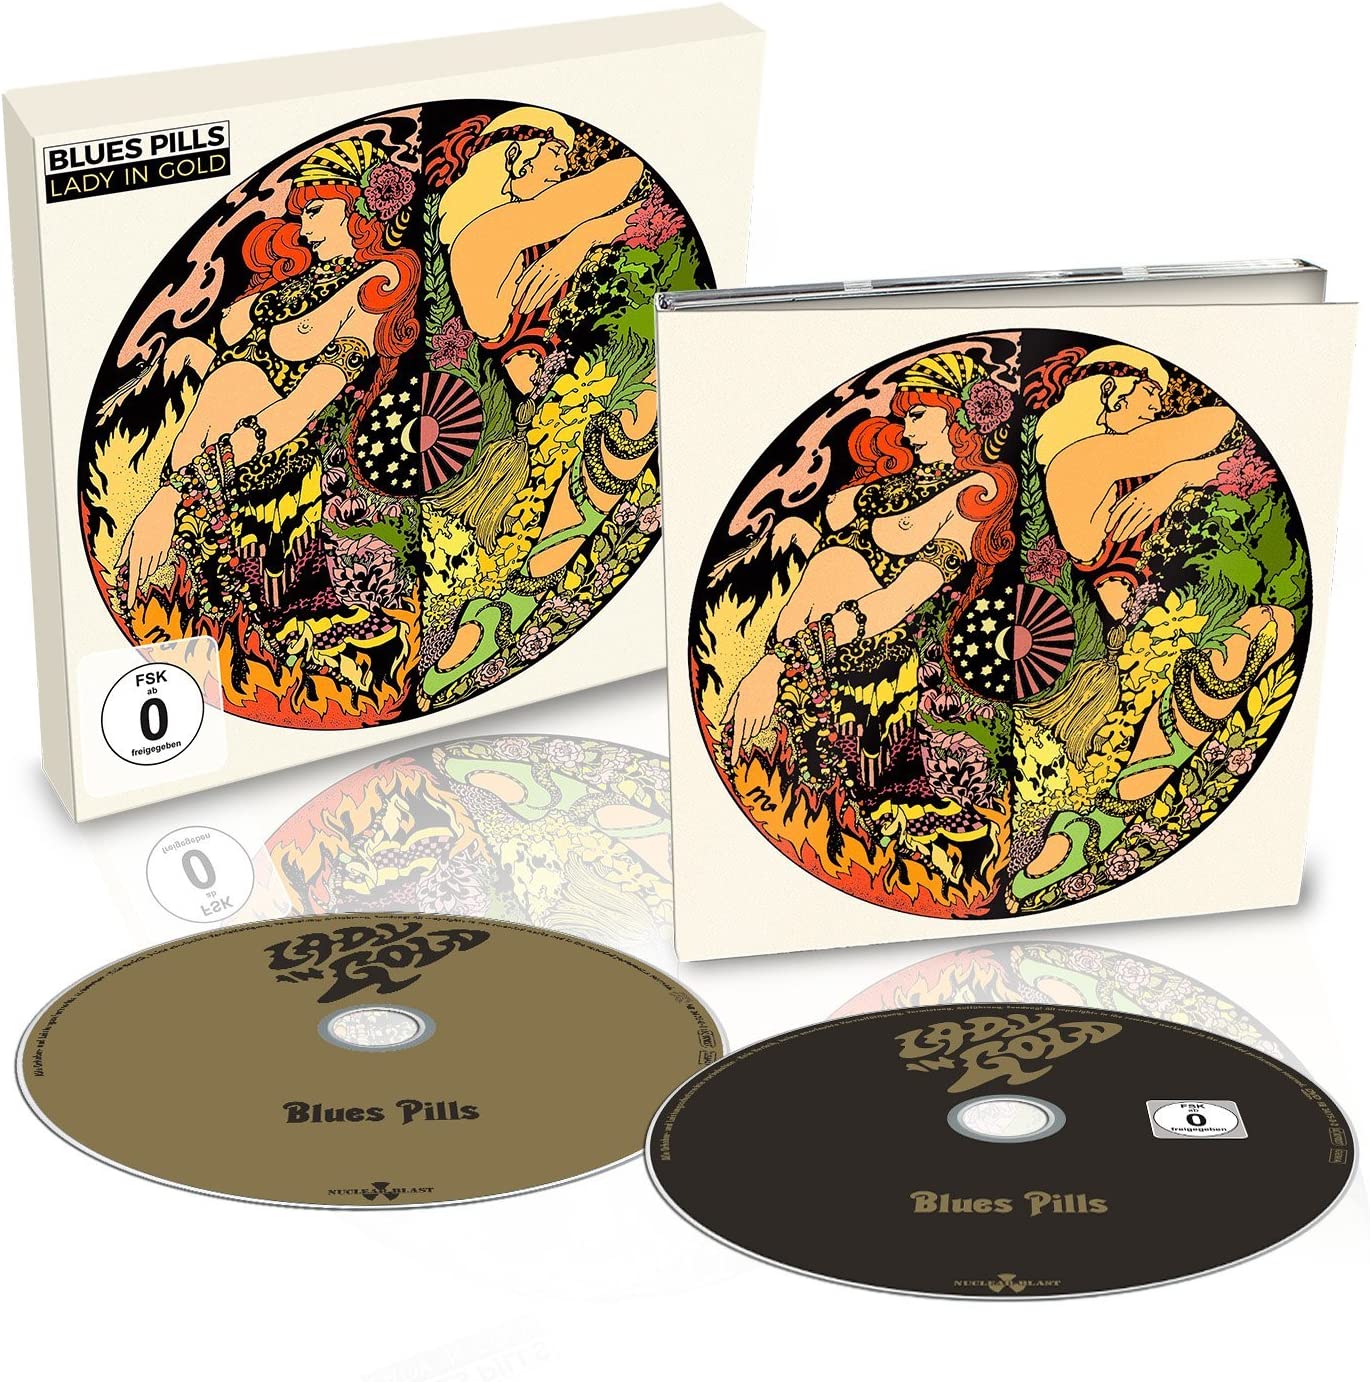 Blues Pills - Lady in Gold - CD + DVD